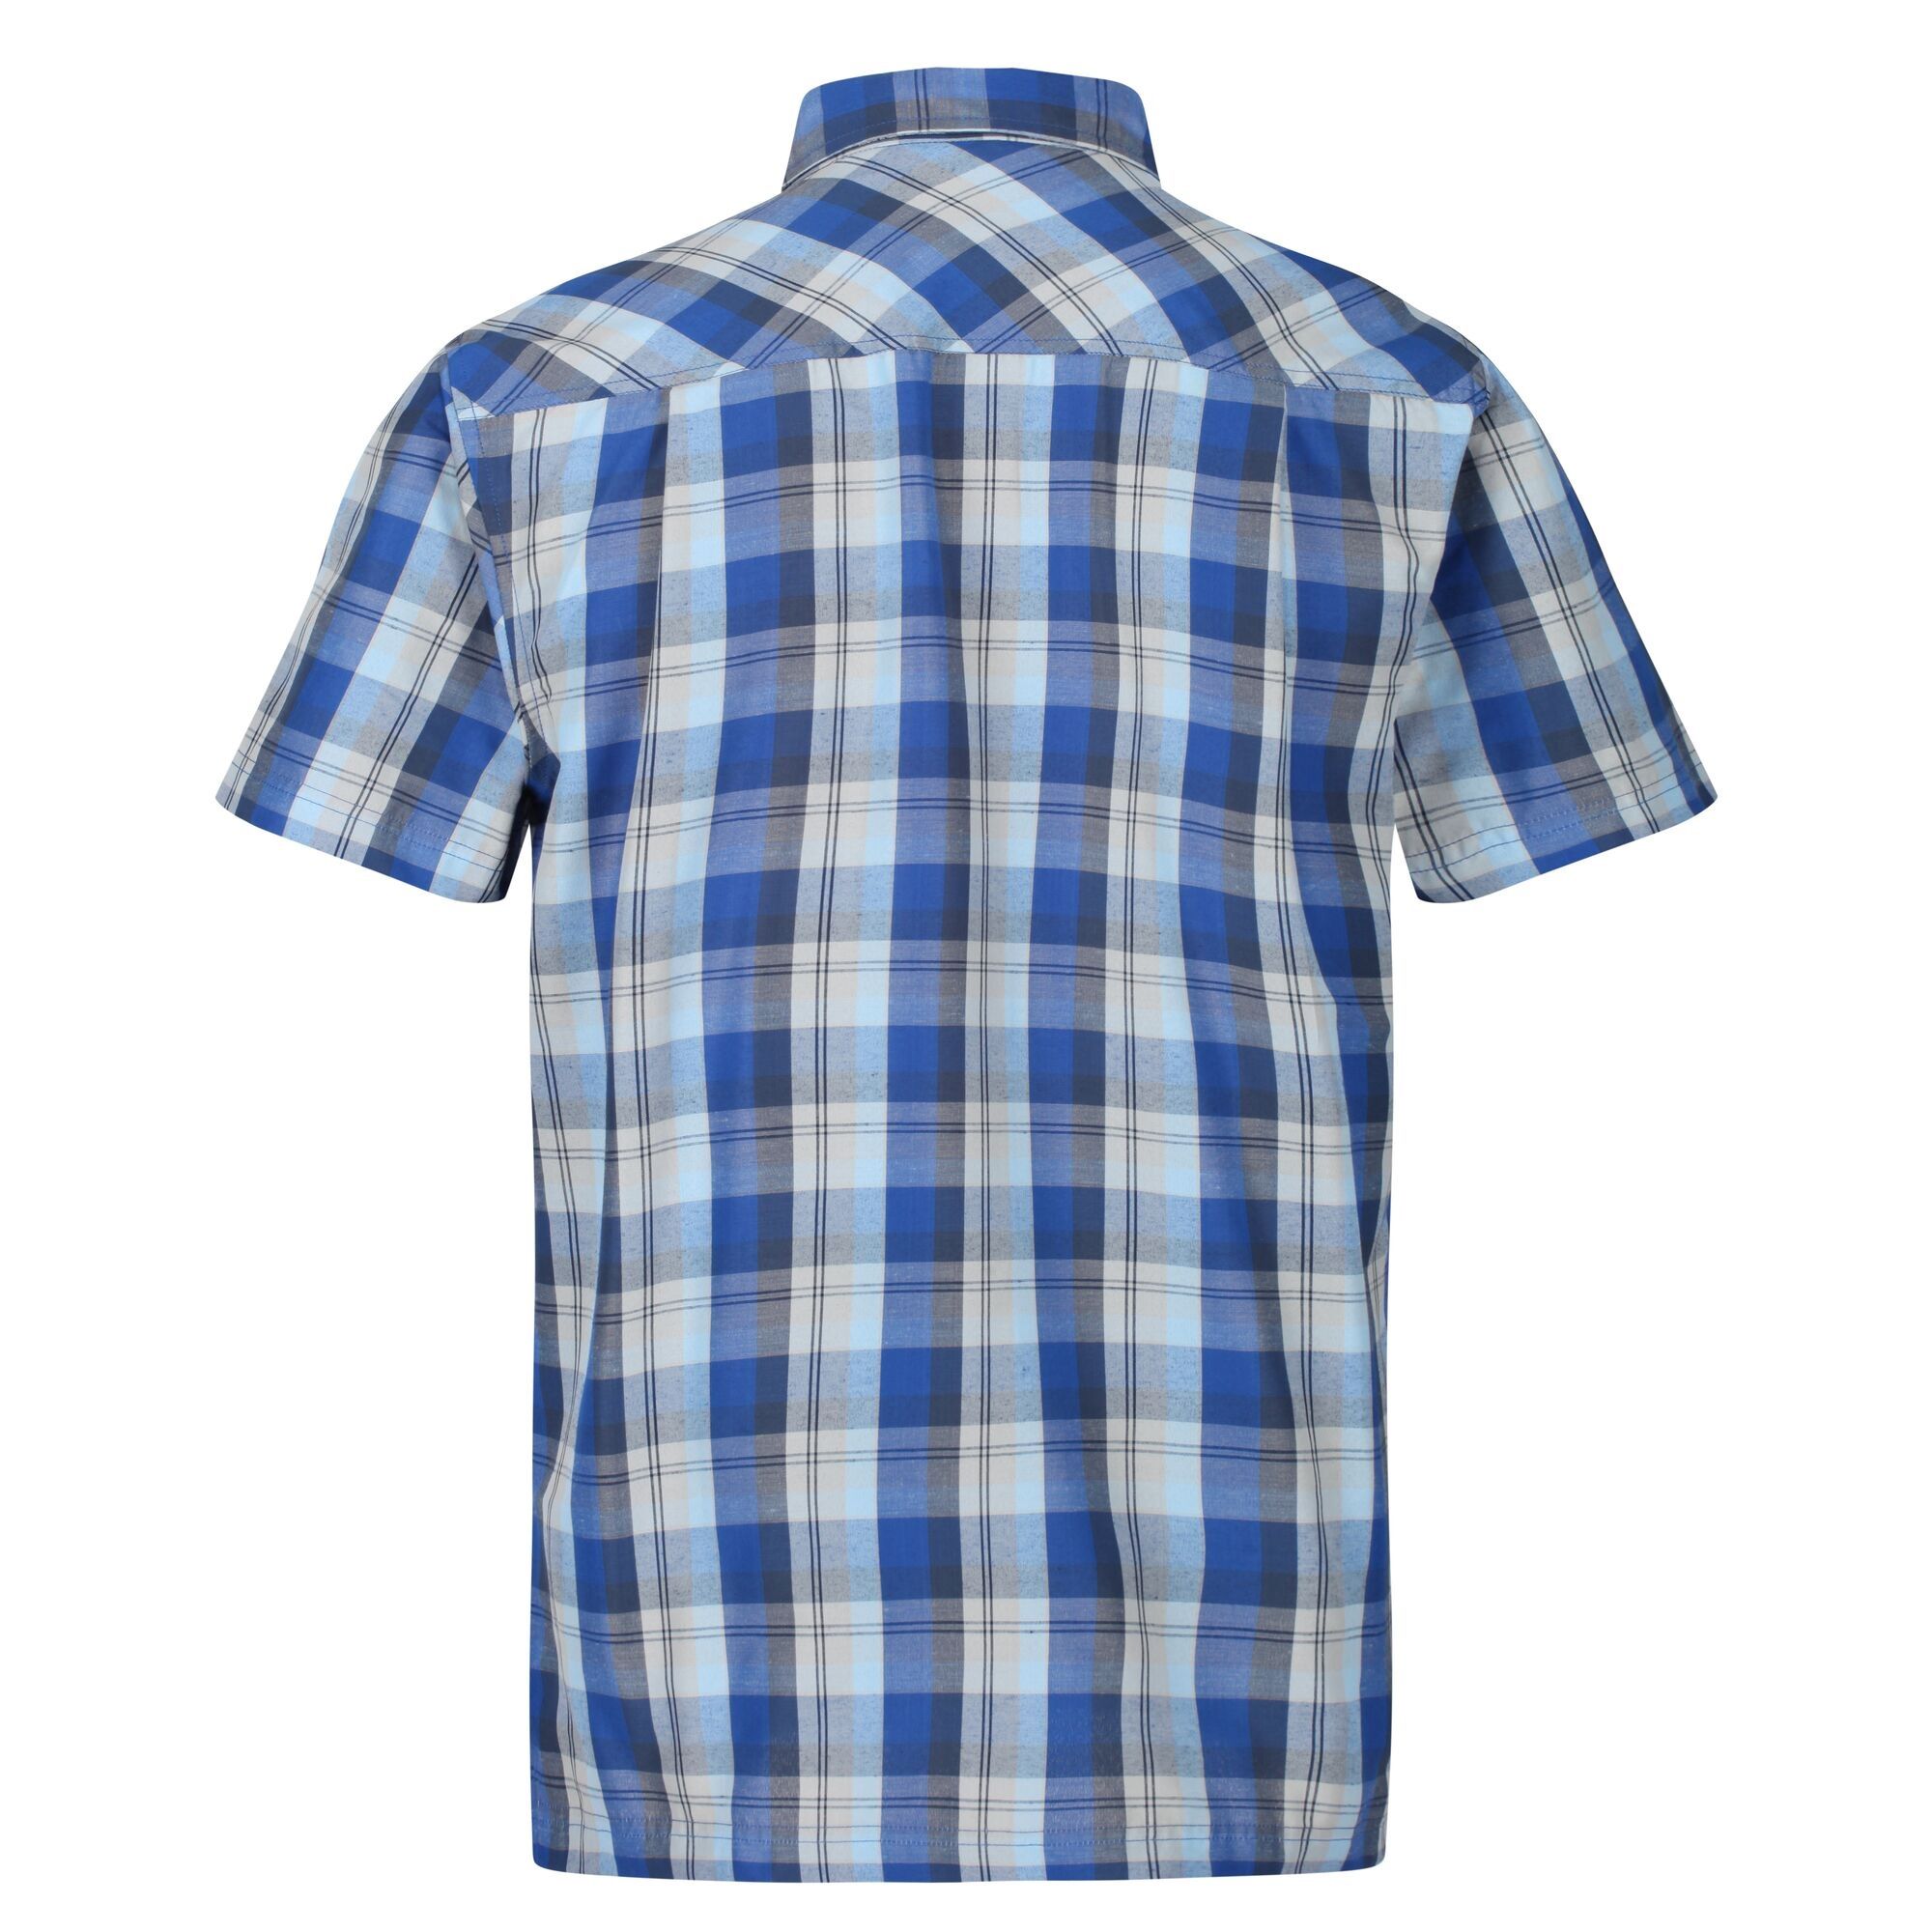 Material: 100% Polyester. Good wicking performance. Quick drying. 1 chest pocket.